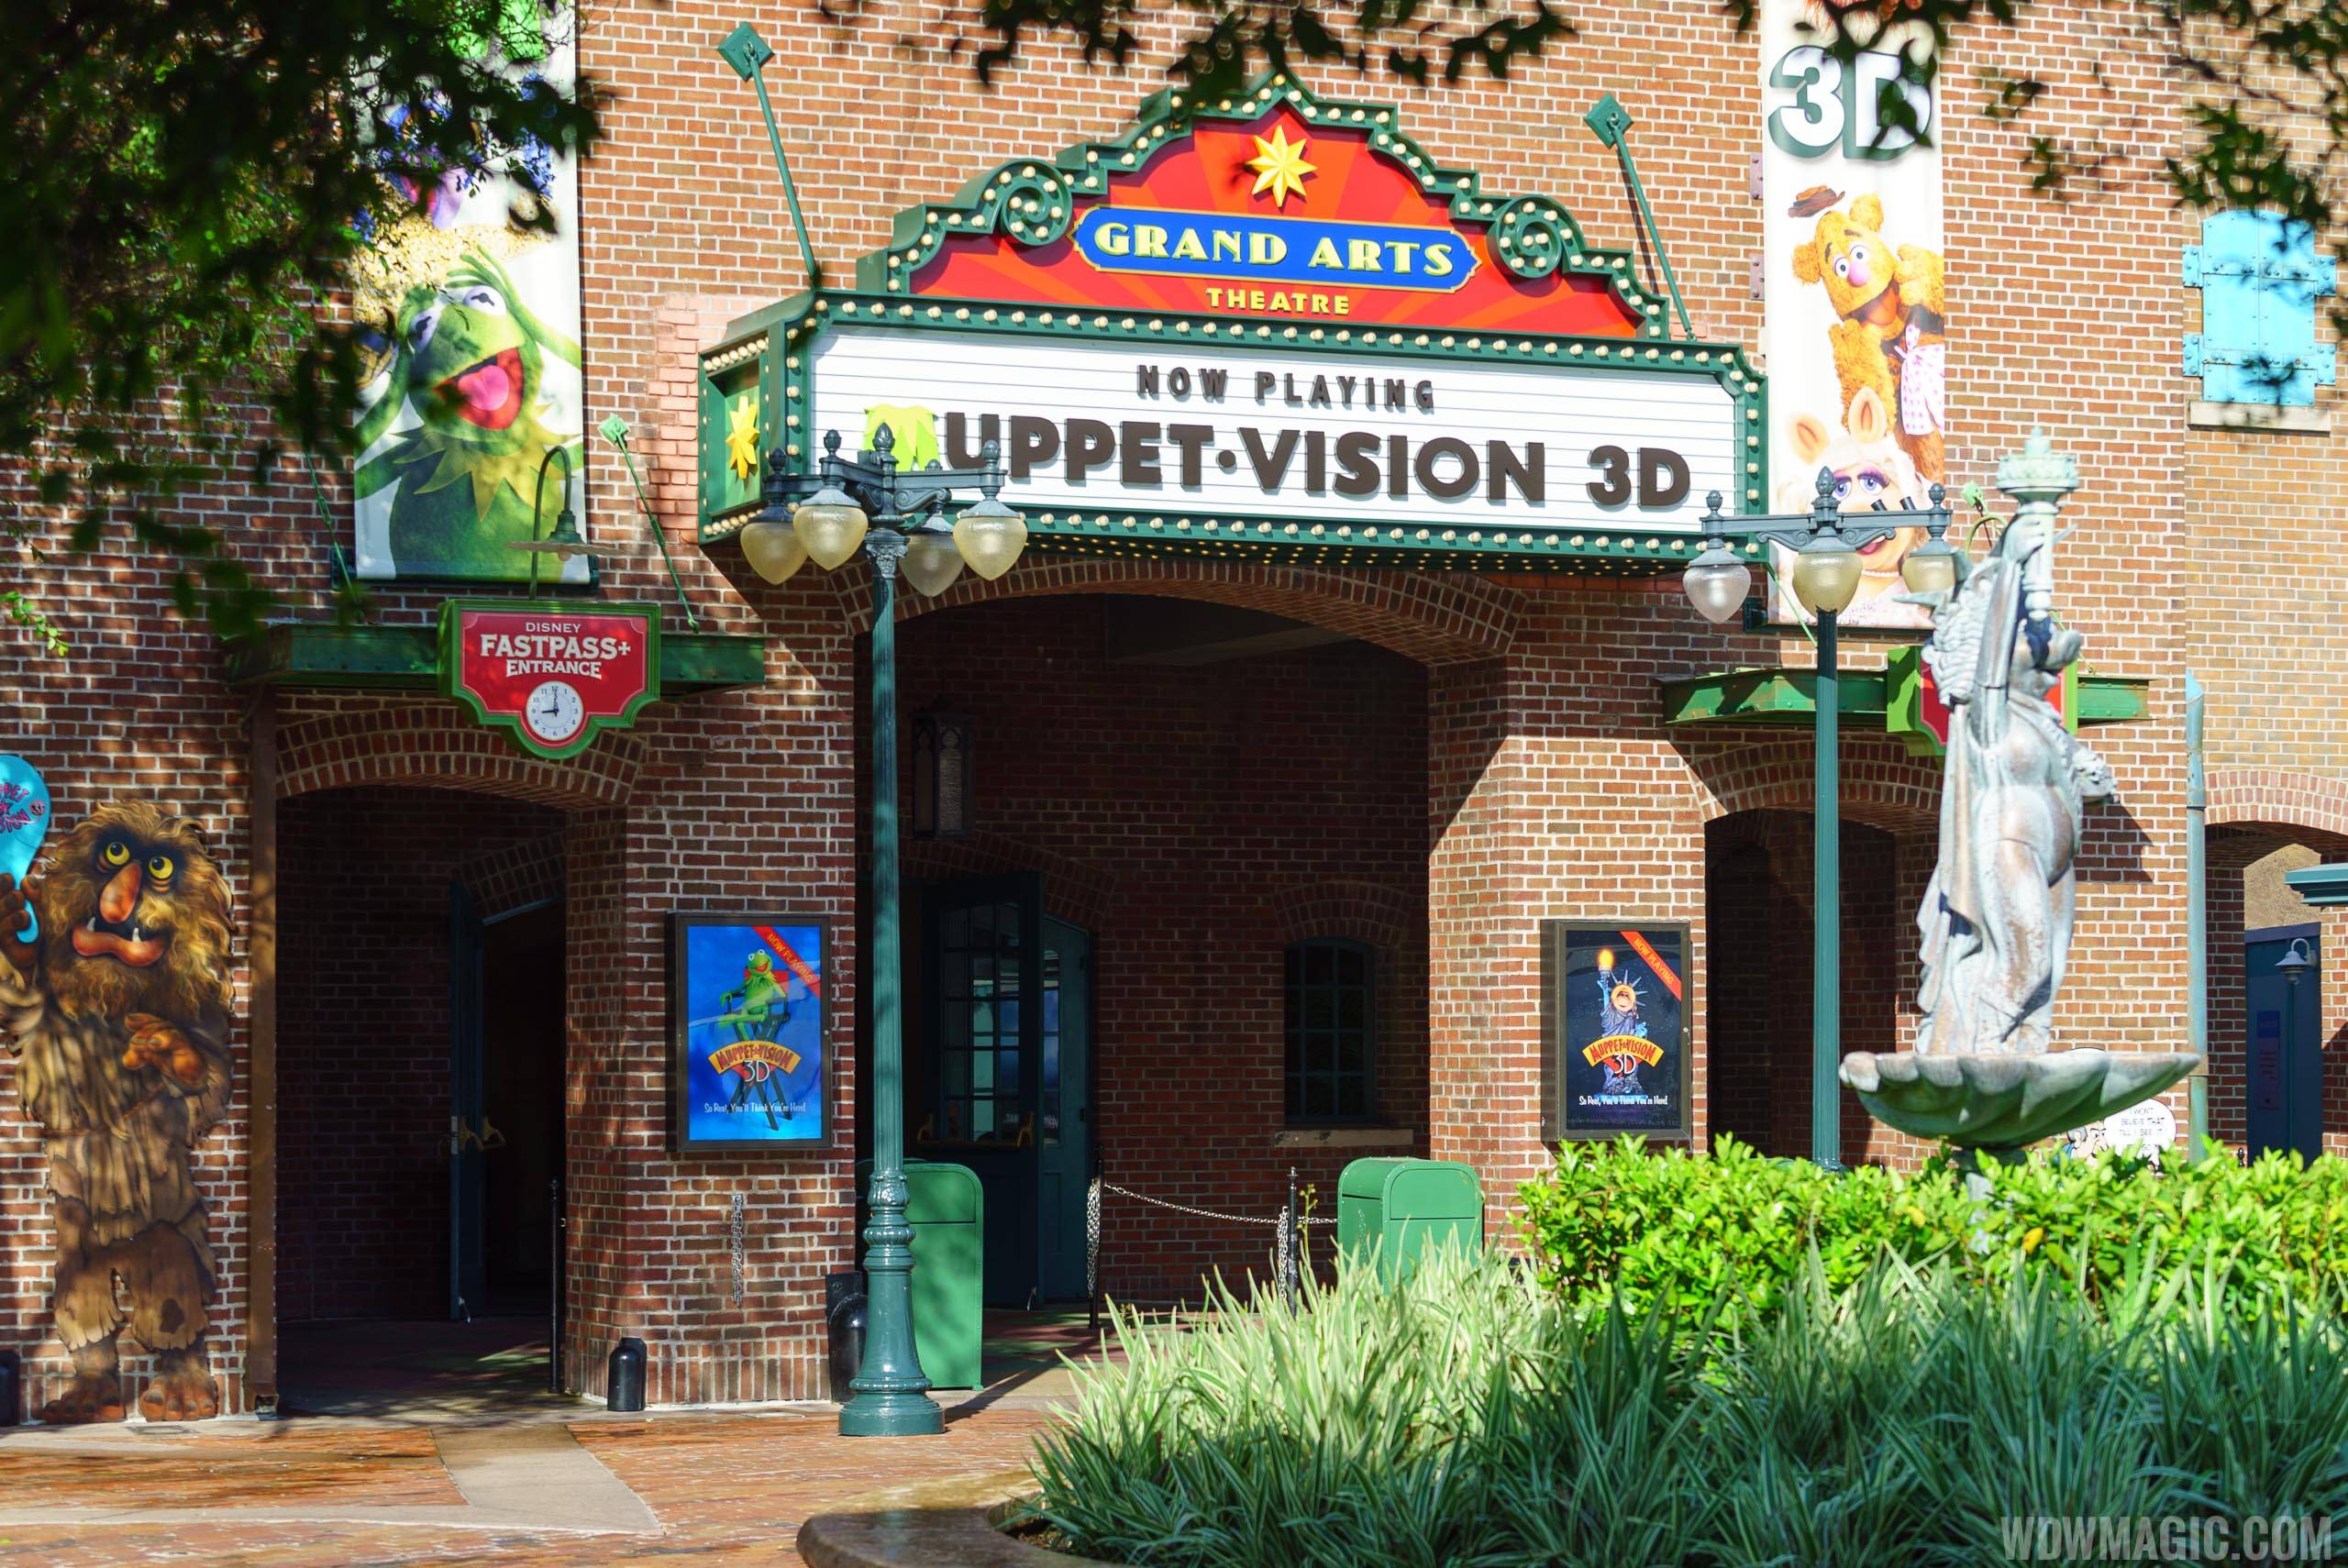 MuppetVision 3D closing for a month-long refurbishment in the summer